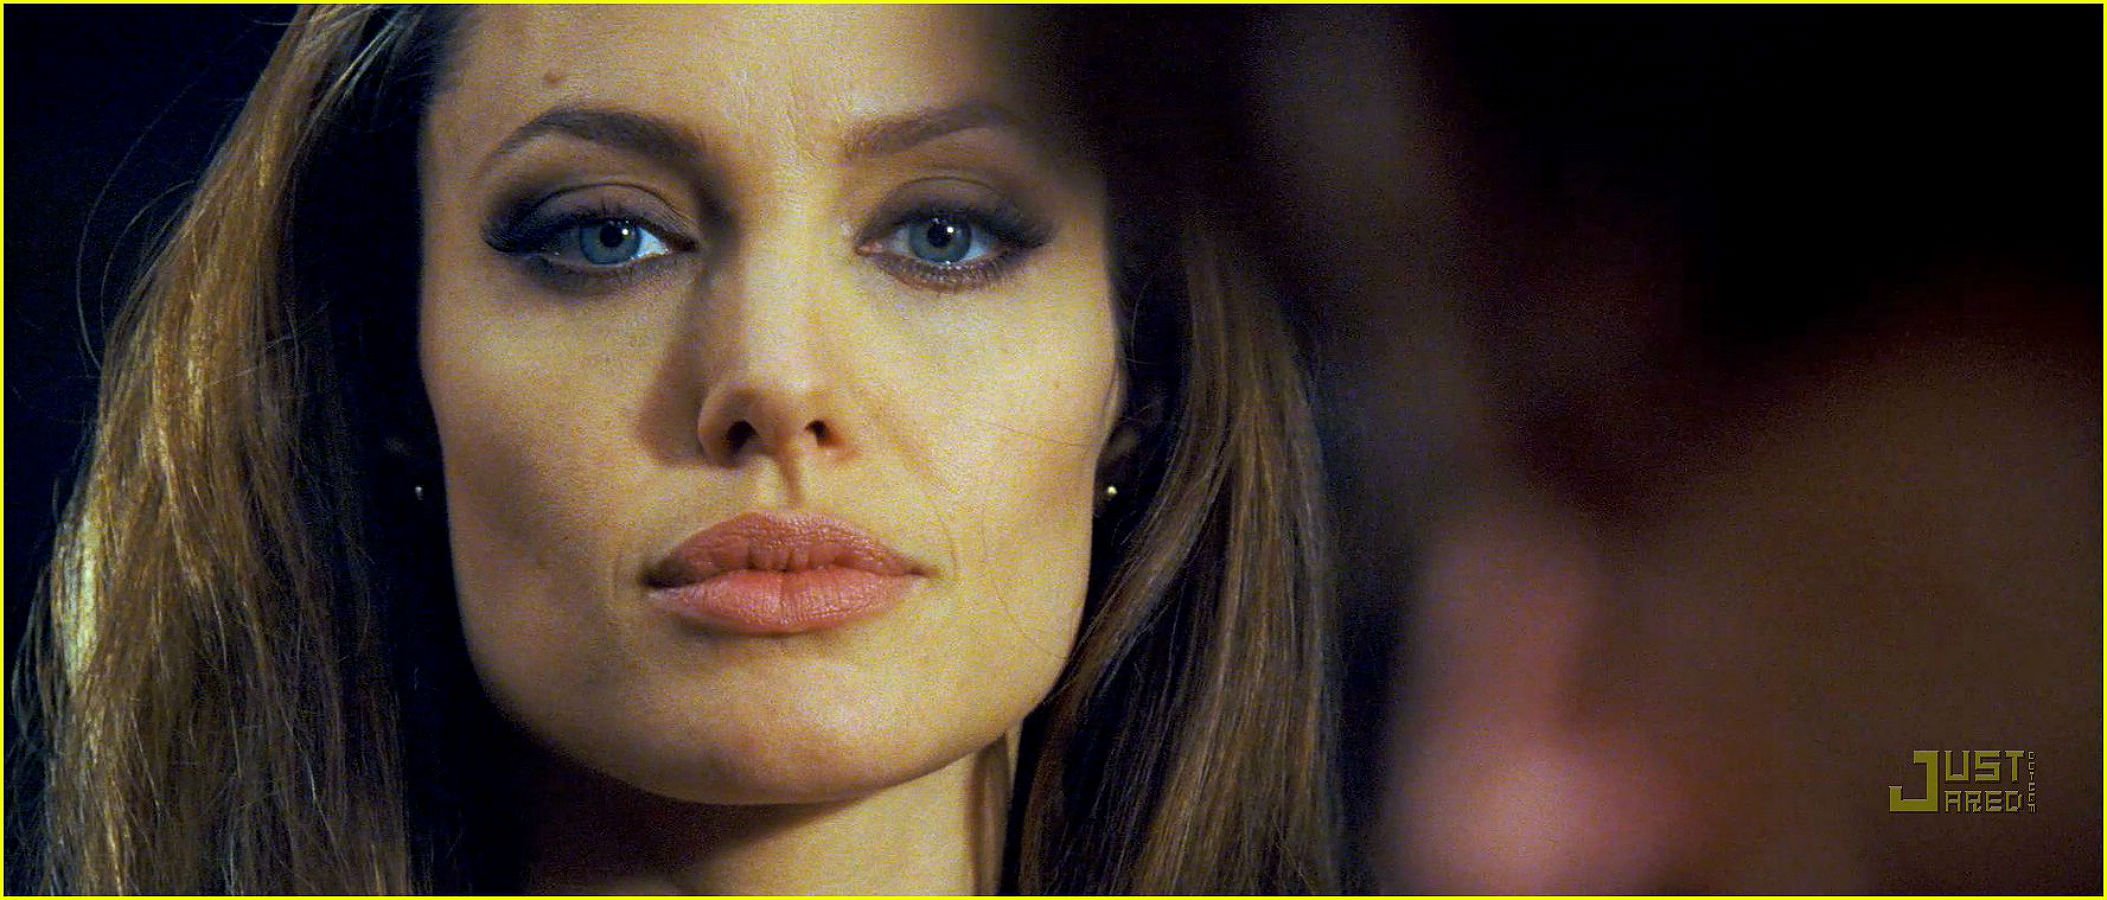 wanted, Action, Crime, Fantasy, Sci fi, Jolie,  55 Wallpaper